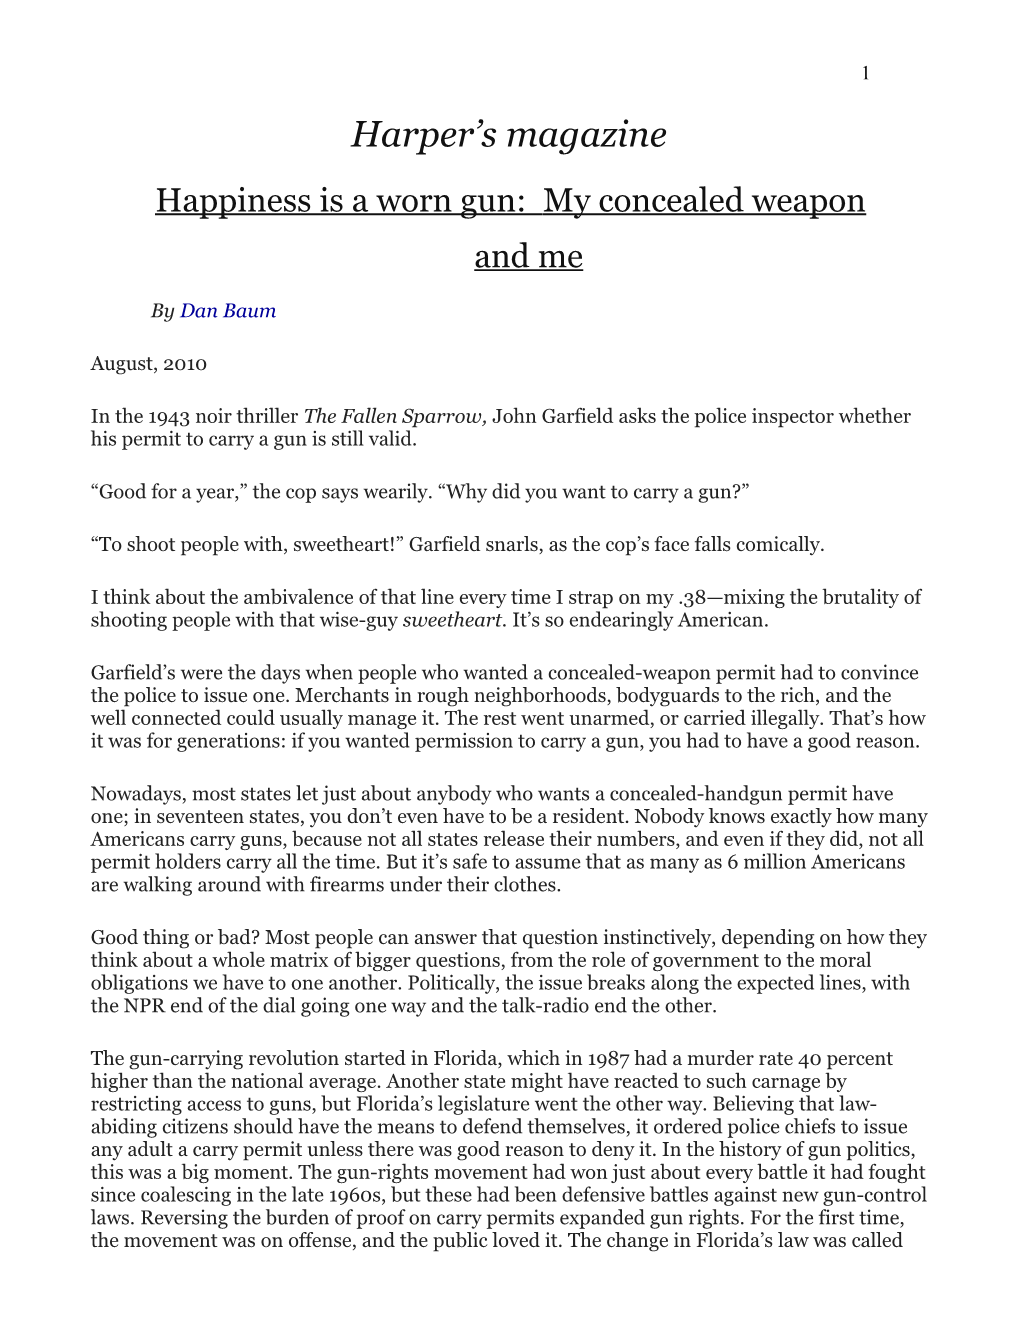 Happiness Is a Worn Gun: My Concealed Weapon and Me